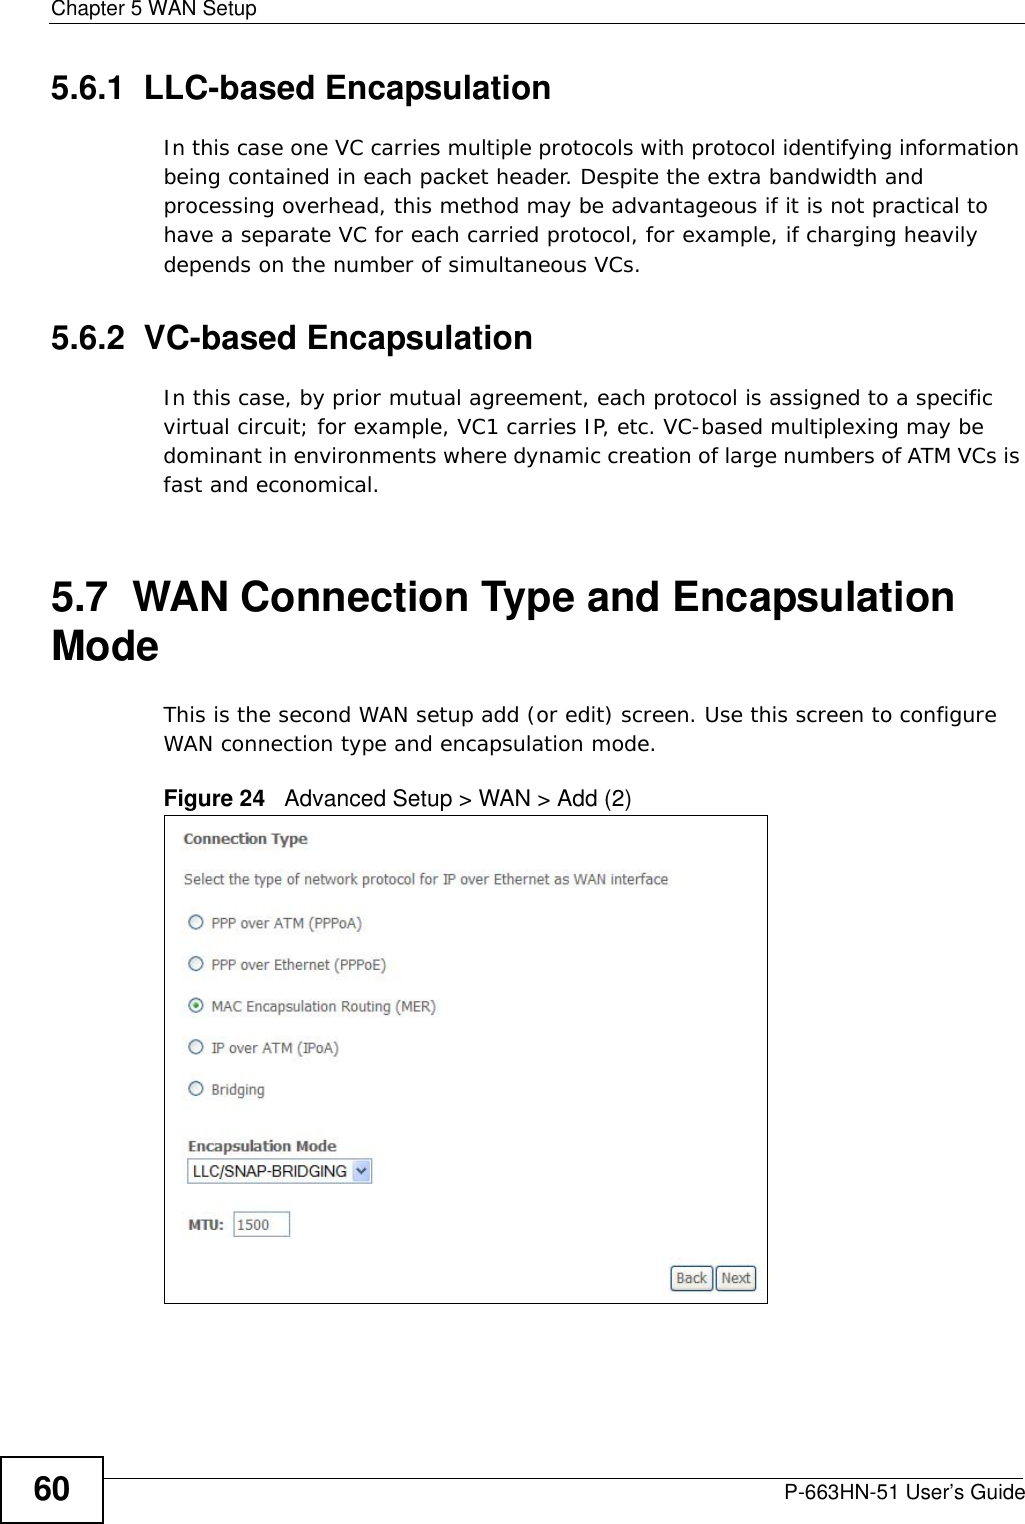 Chapter 5 WAN SetupP-663HN-51 User’s Guide605.6.1  LLC-based EncapsulationIn this case one VC carries multiple protocols with protocol identifying information being contained in each packet header. Despite the extra bandwidth and processing overhead, this method may be advantageous if it is not practical to have a separate VC for each carried protocol, for example, if charging heavily depends on the number of simultaneous VCs.5.6.2  VC-based EncapsulationIn this case, by prior mutual agreement, each protocol is assigned to a specific virtual circuit; for example, VC1 carries IP, etc. VC-based multiplexing may be dominant in environments where dynamic creation of large numbers of ATM VCs is fast and economical.5.7  WAN Connection Type and Encapsulation Mode This is the second WAN setup add (or edit) screen. Use this screen to configure WAN connection type and encapsulation mode.Figure 24   Advanced Setup &gt; WAN &gt; Add (2)